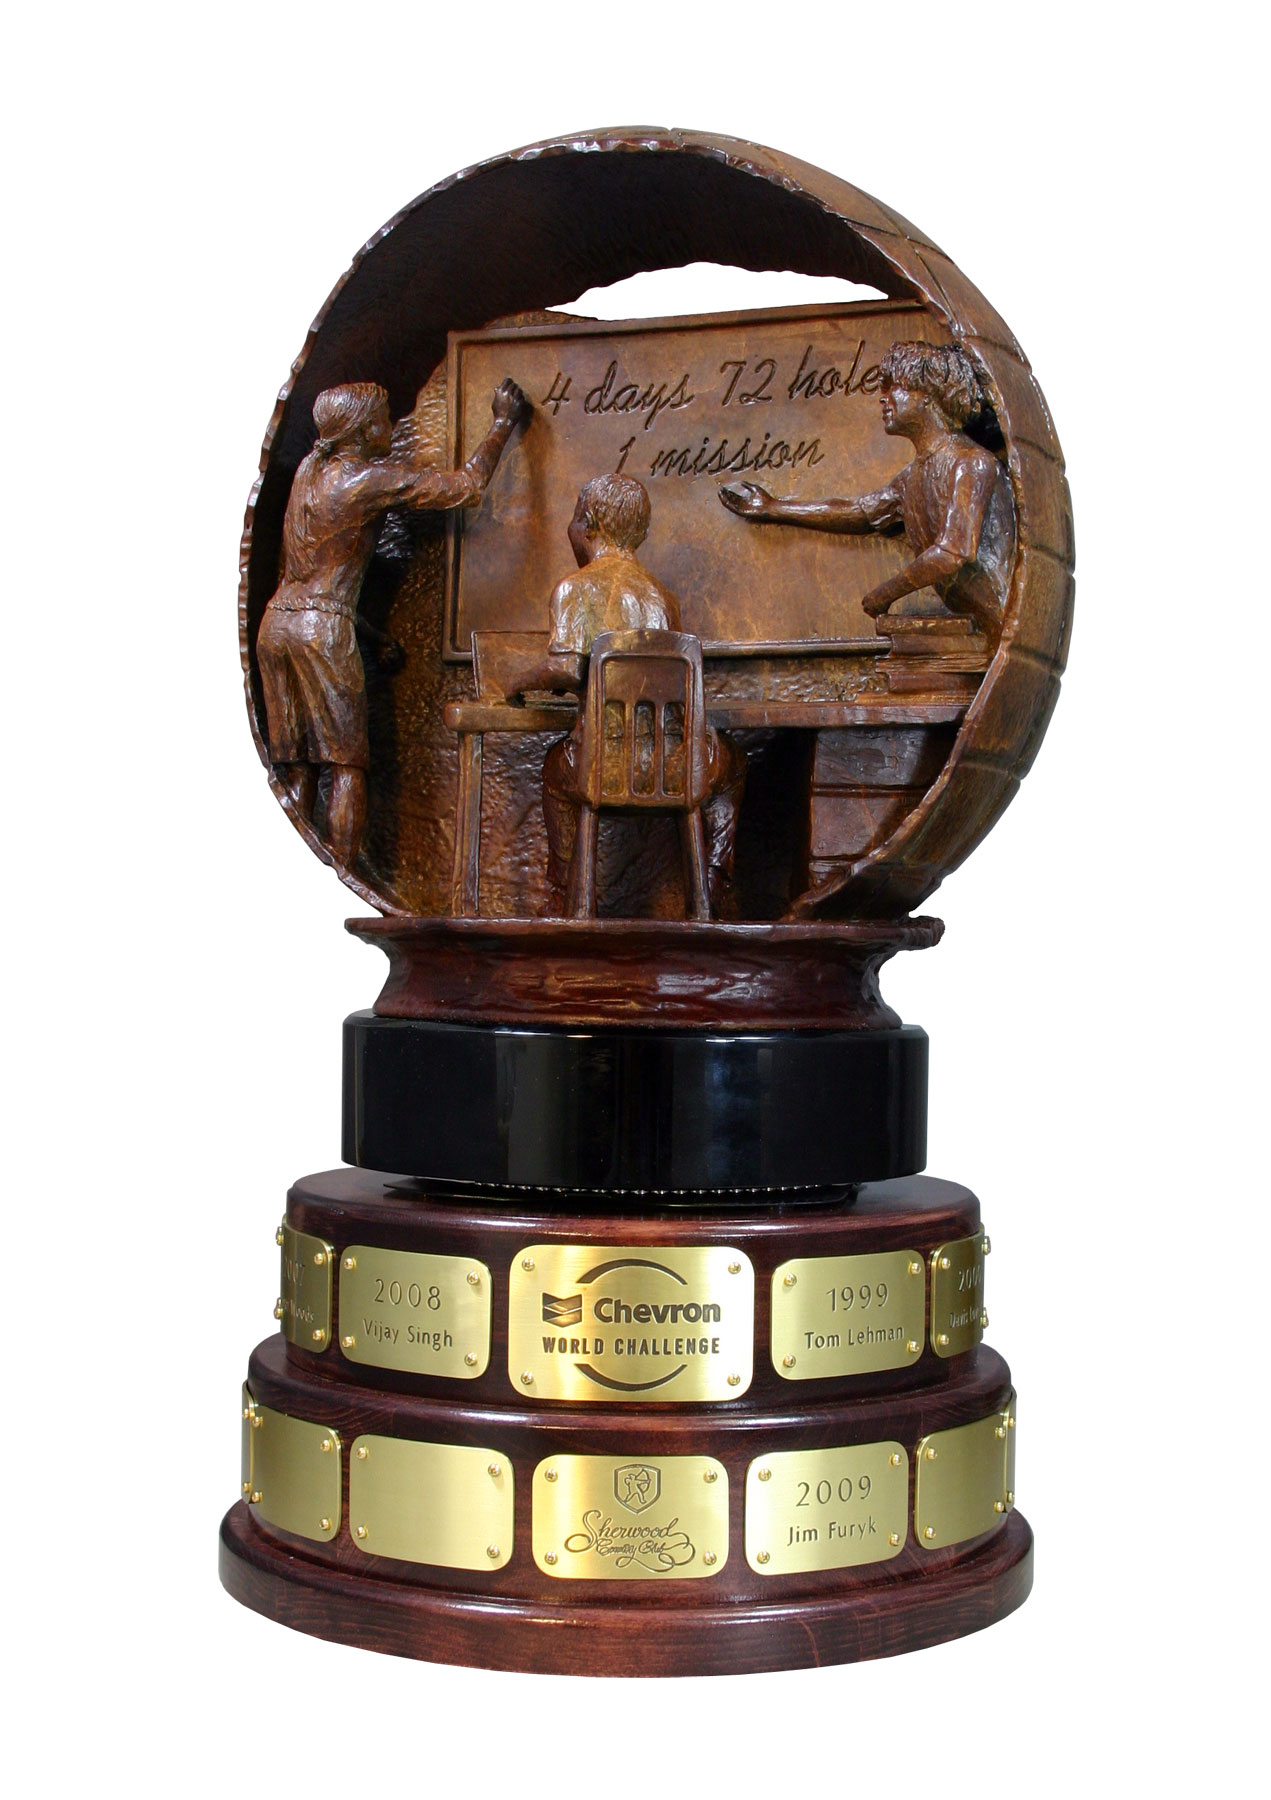 Chevron World Challenge trophy made by Malcolm DeMille- Side 2